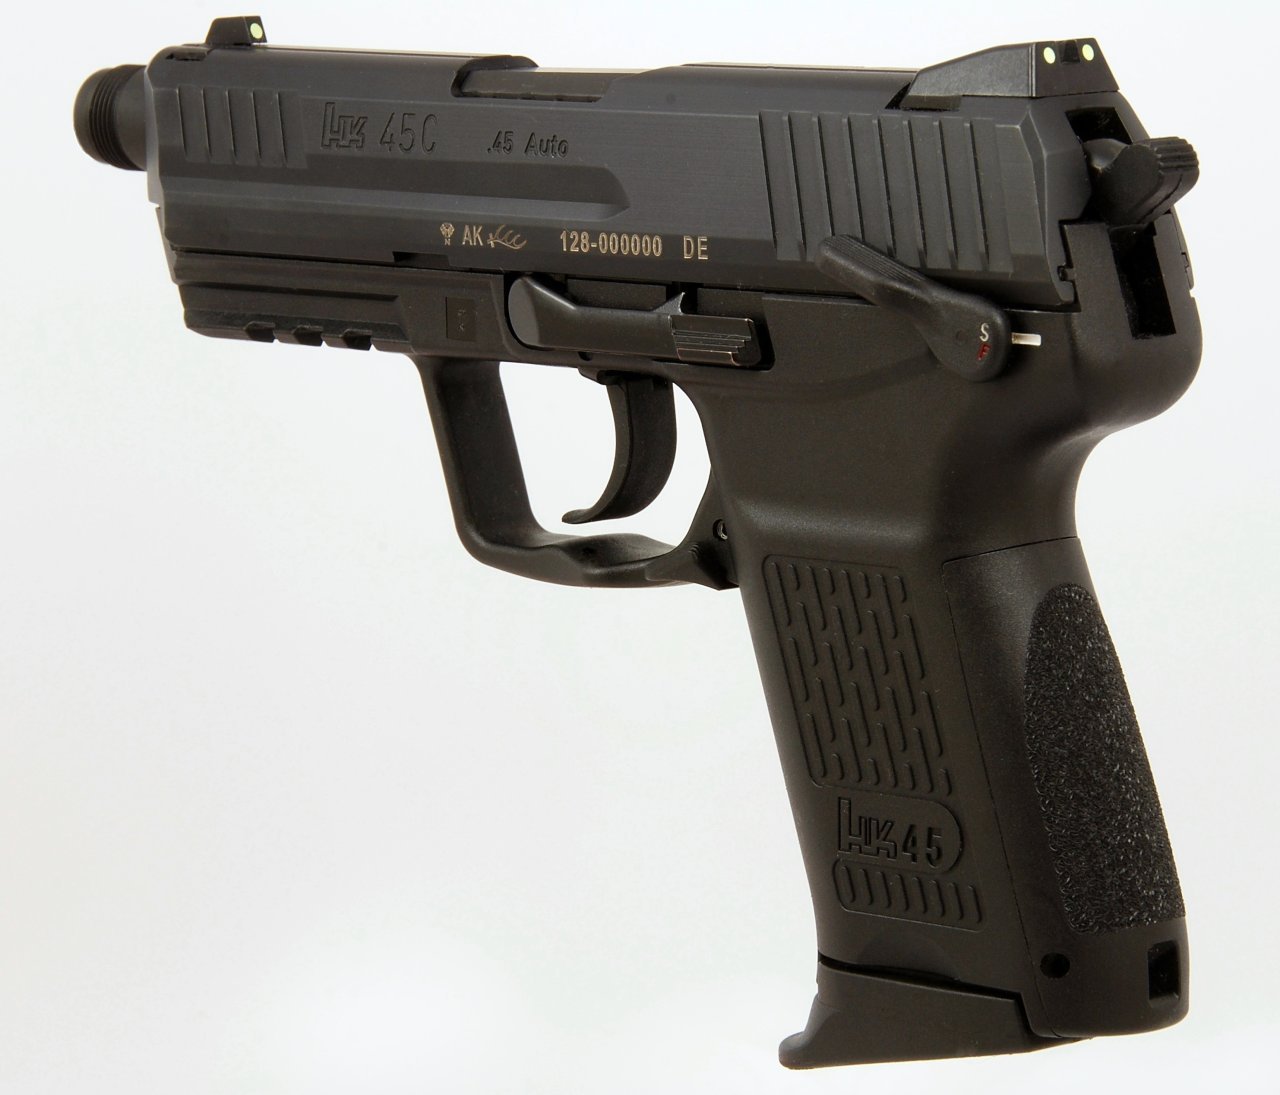 The Army's Big Mistake? Why the HK45 Is One of the Best Handguns